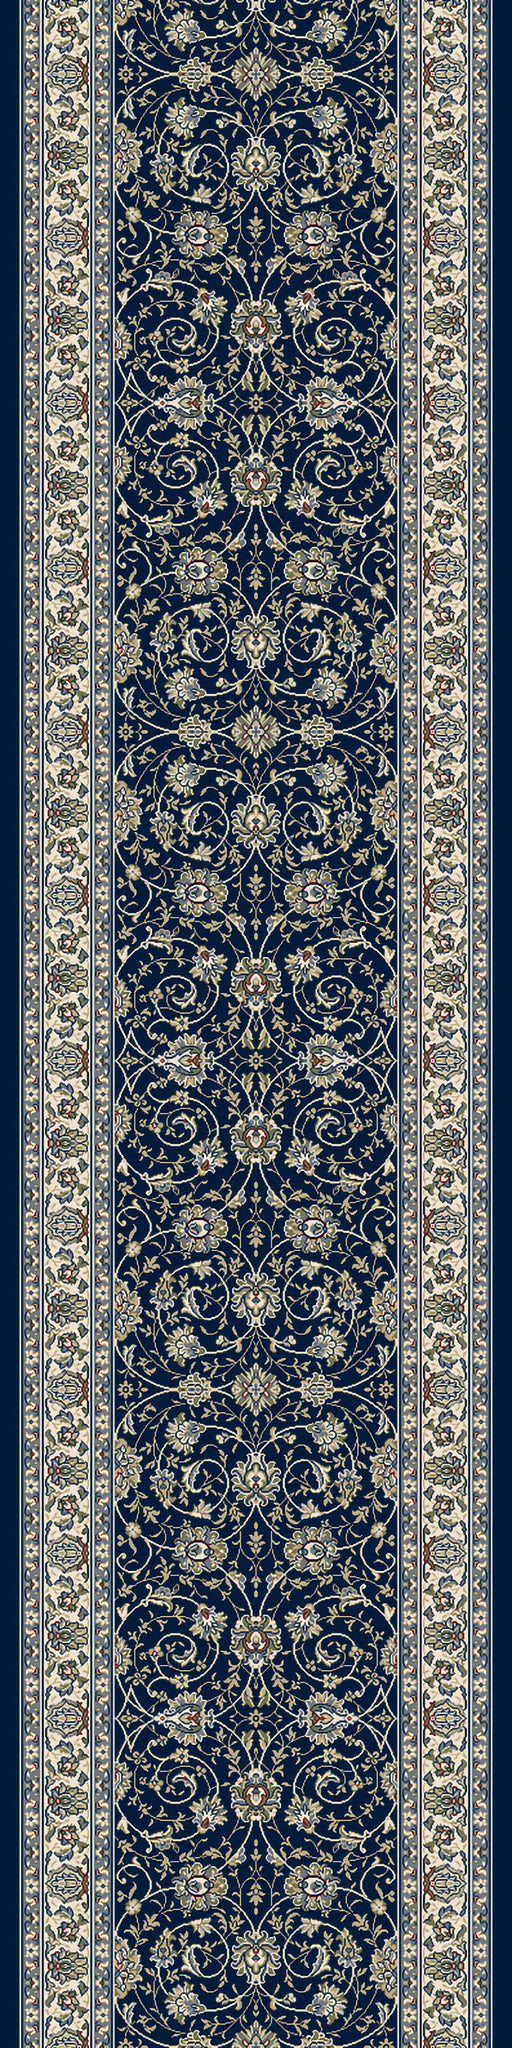 Dynamic Rugs Ancient Garden 57120 Blue/Ivory